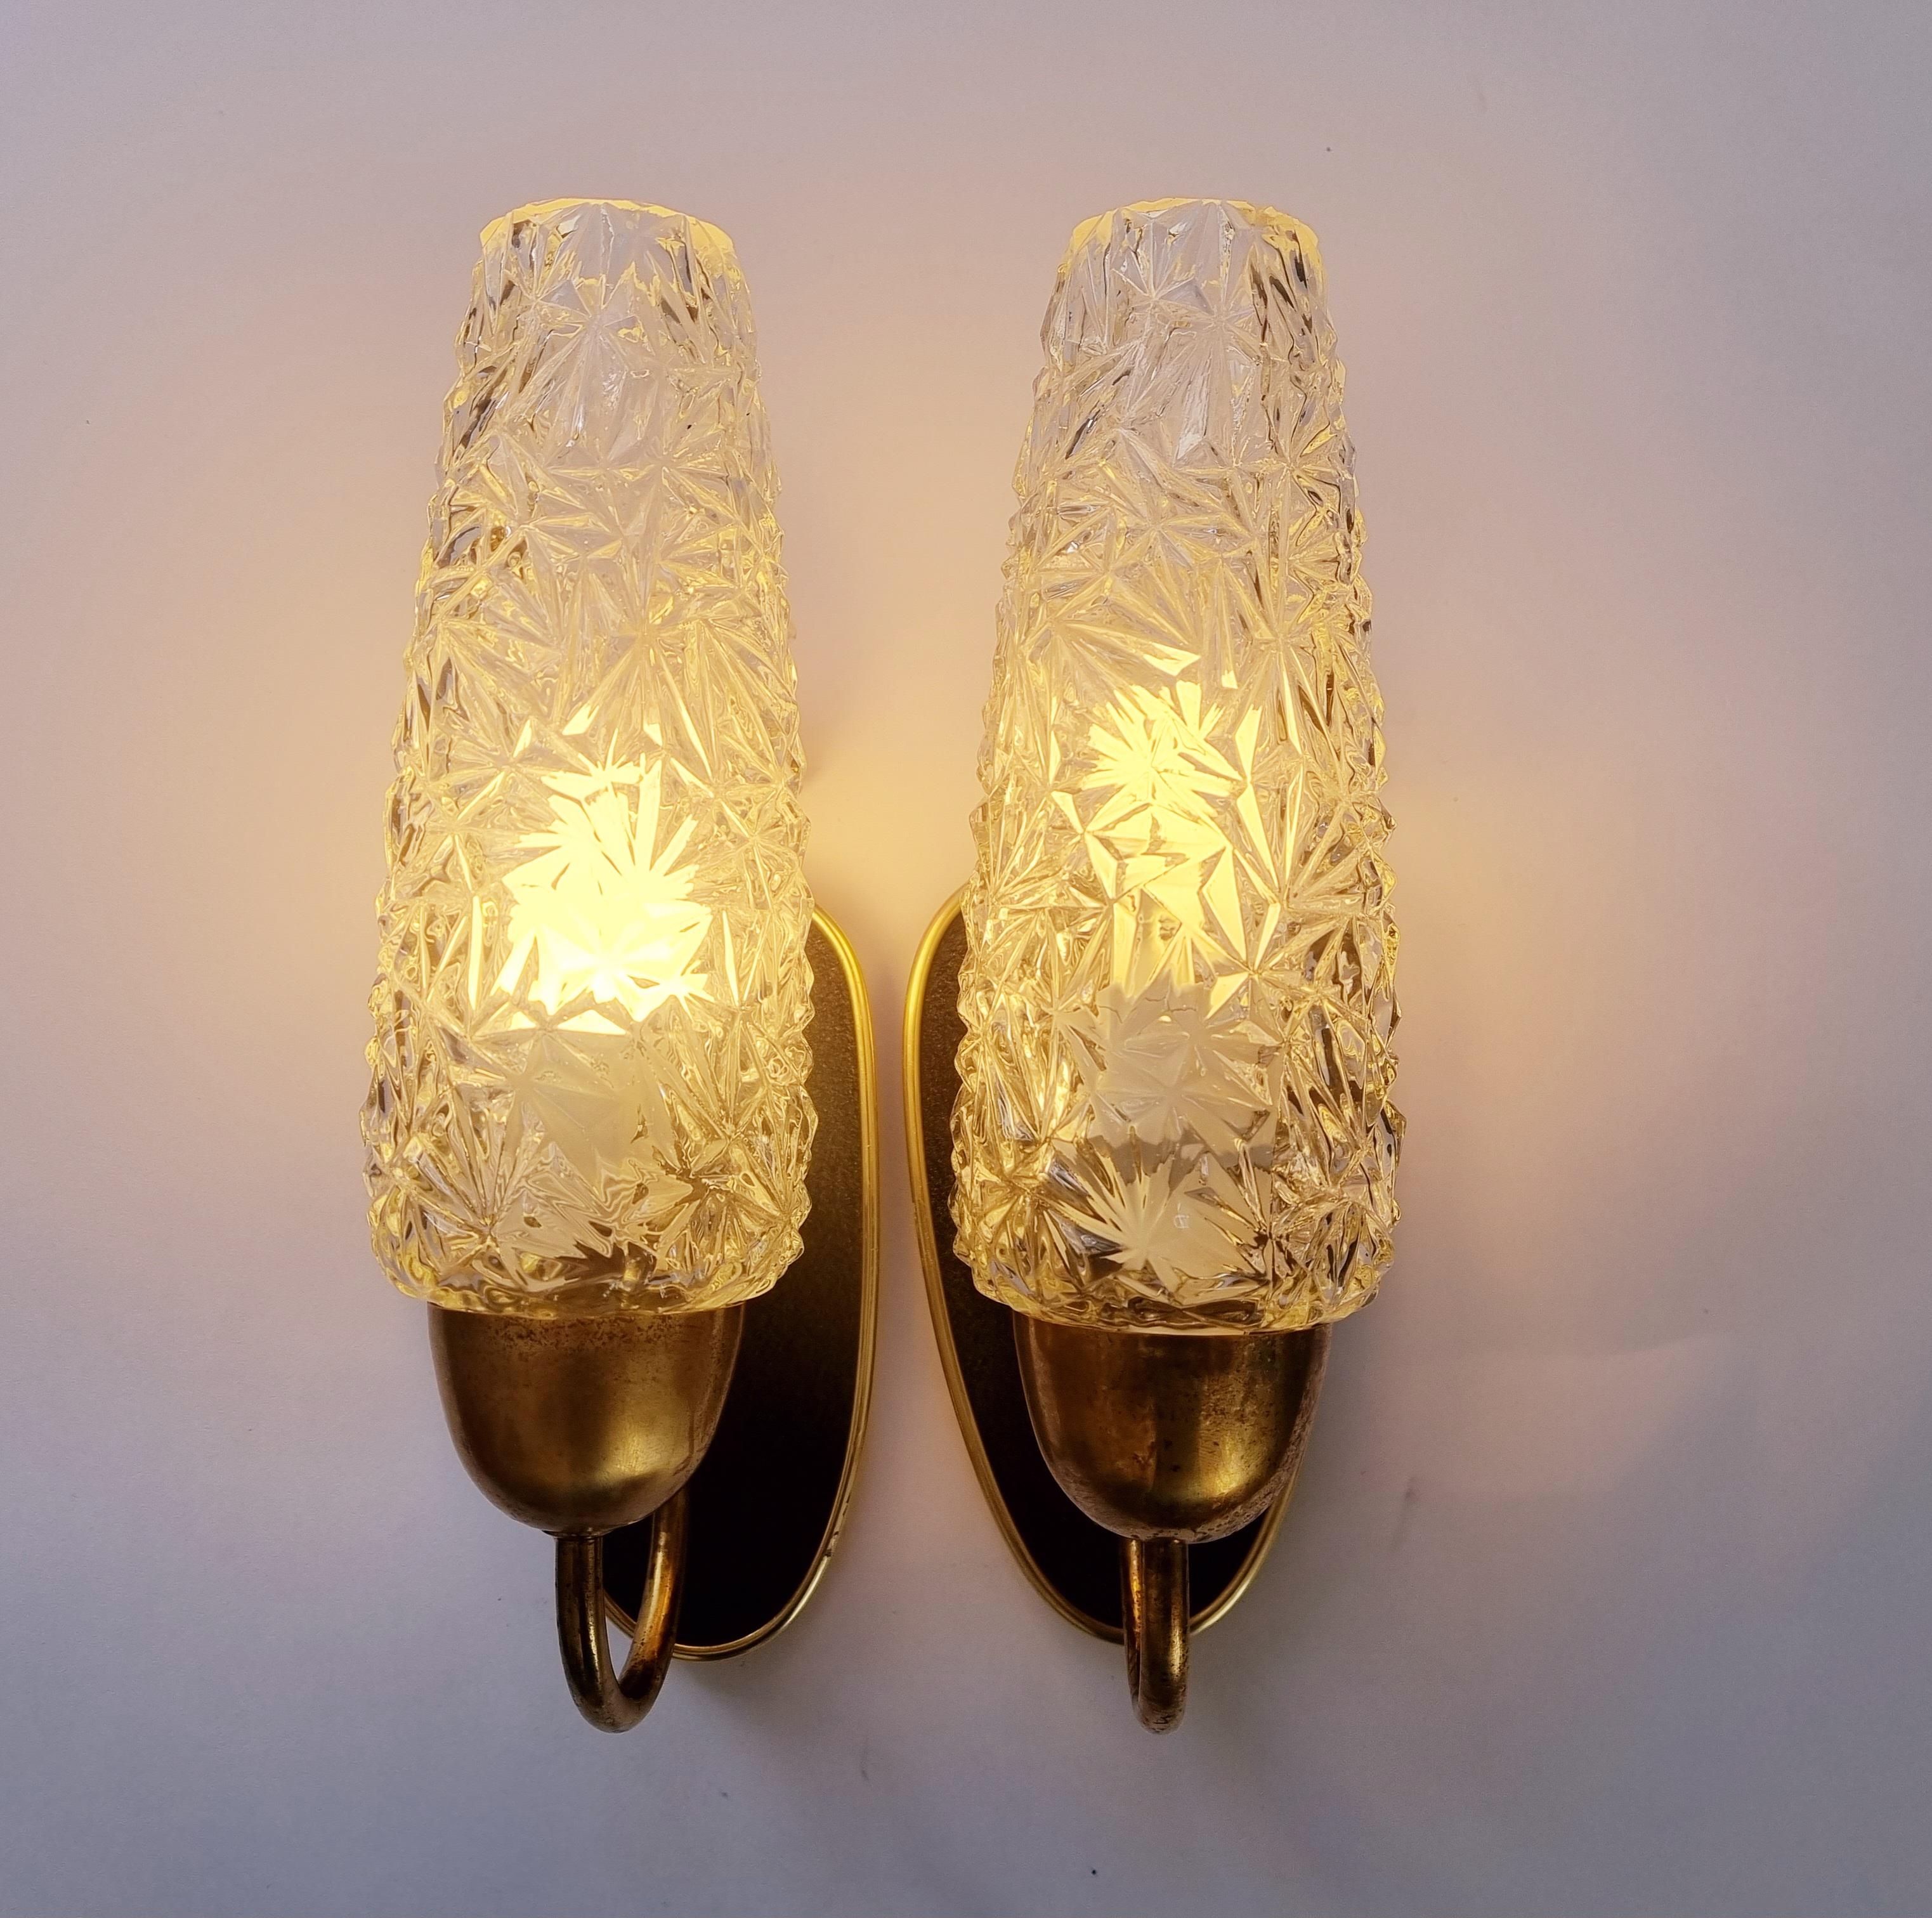 Pair of Rare Midcentury Wall Lamps, Germany, 1960s For Sale 8